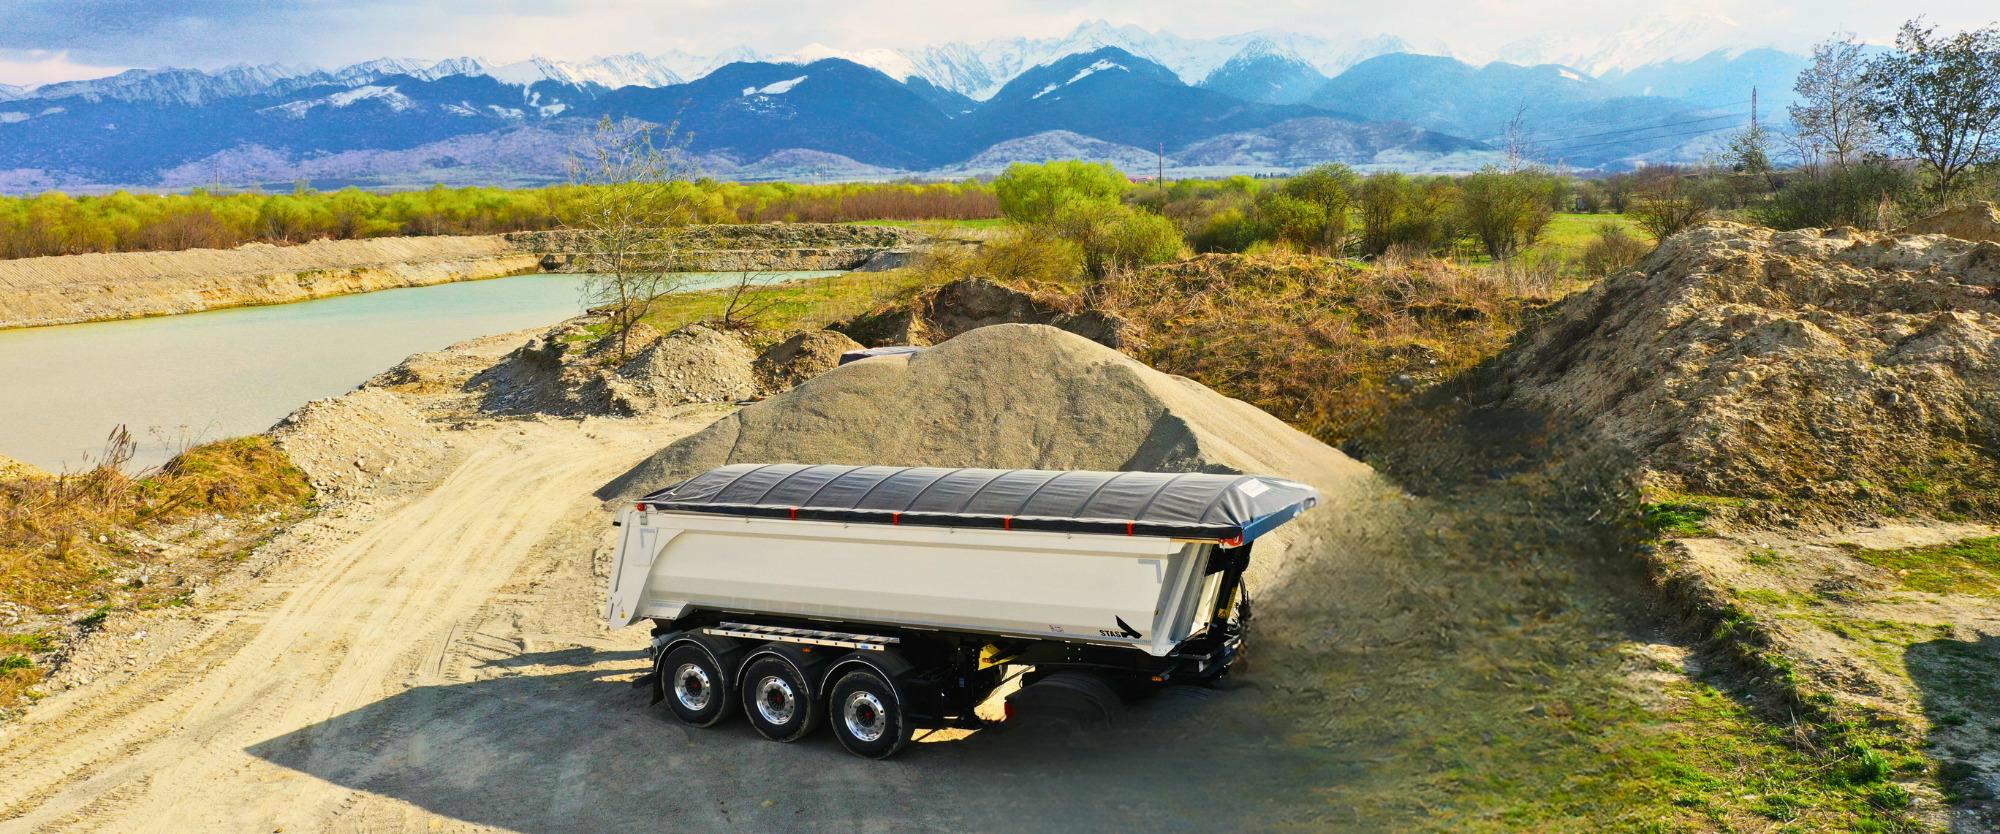 Construction tippers: the perfect mix of functionality, durability and design